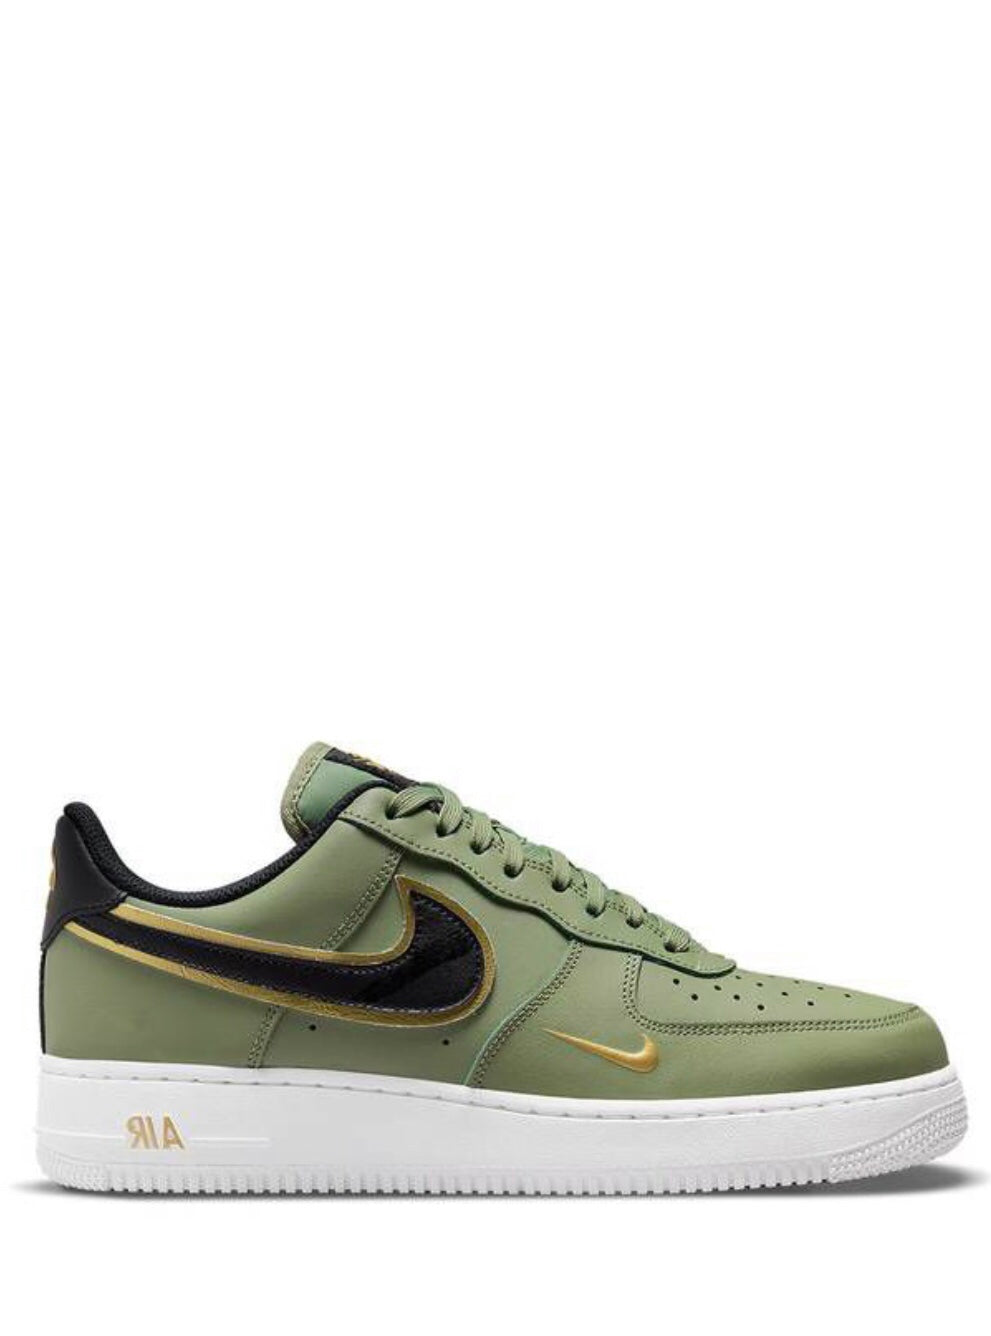 Nike Air Force 1 Green Gold Swoosh, Where To Buy